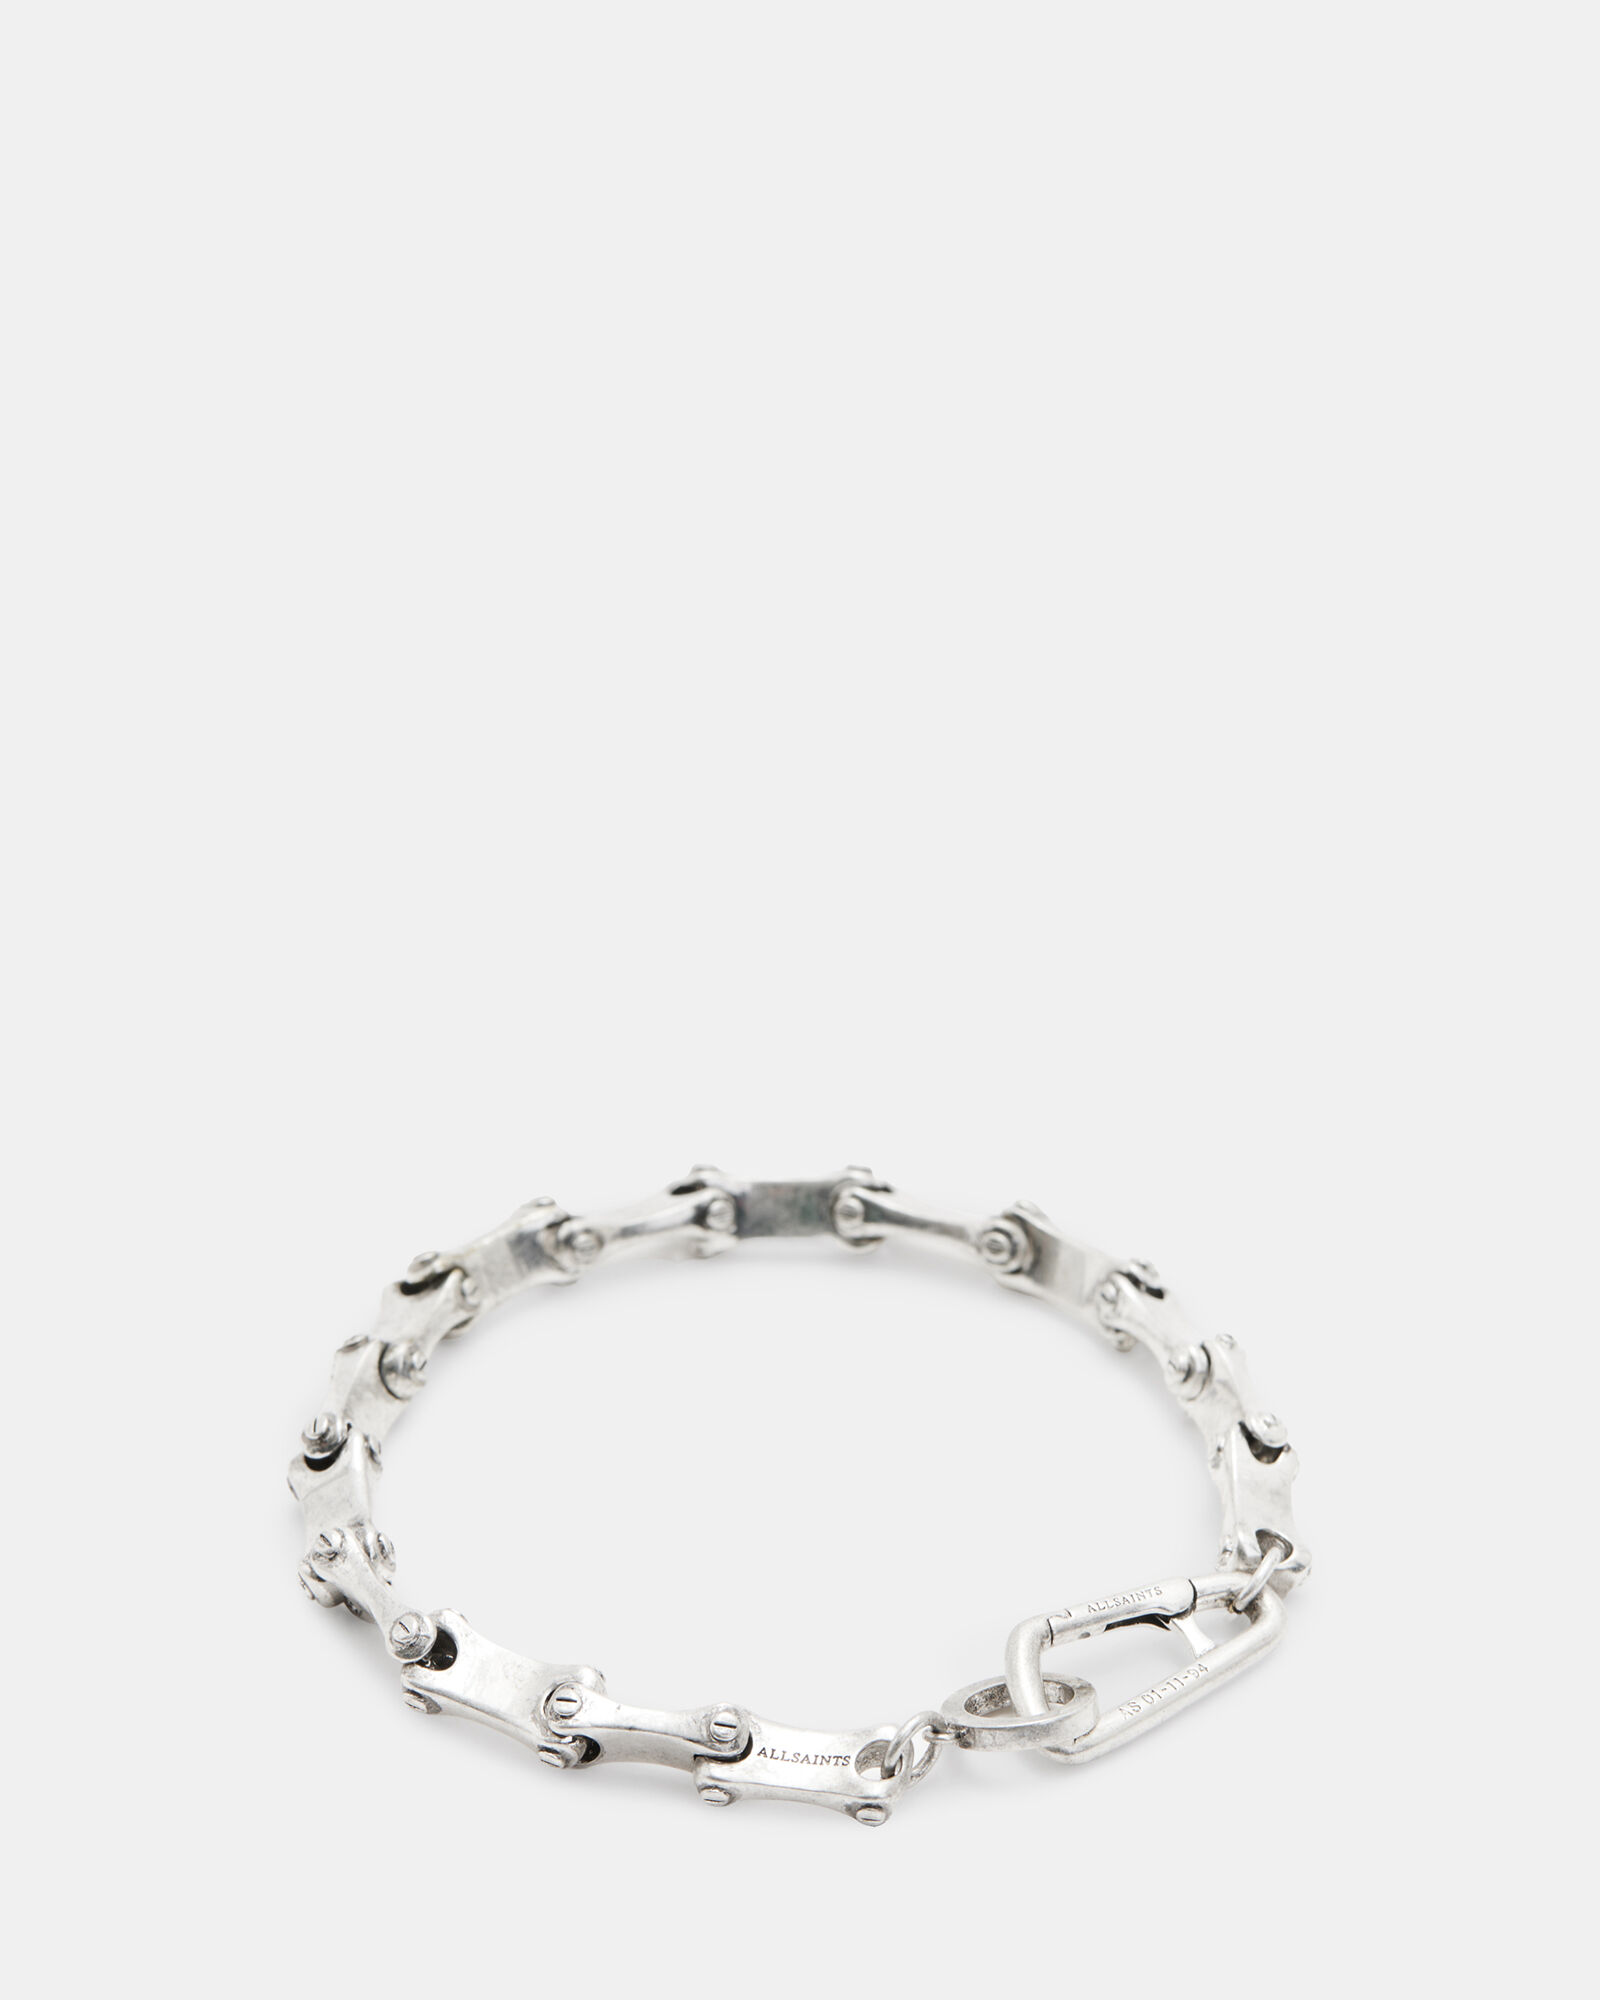 T Bangle in Polished Finish with Black Rhodium Plated Sterling Silver –  Tateossian London